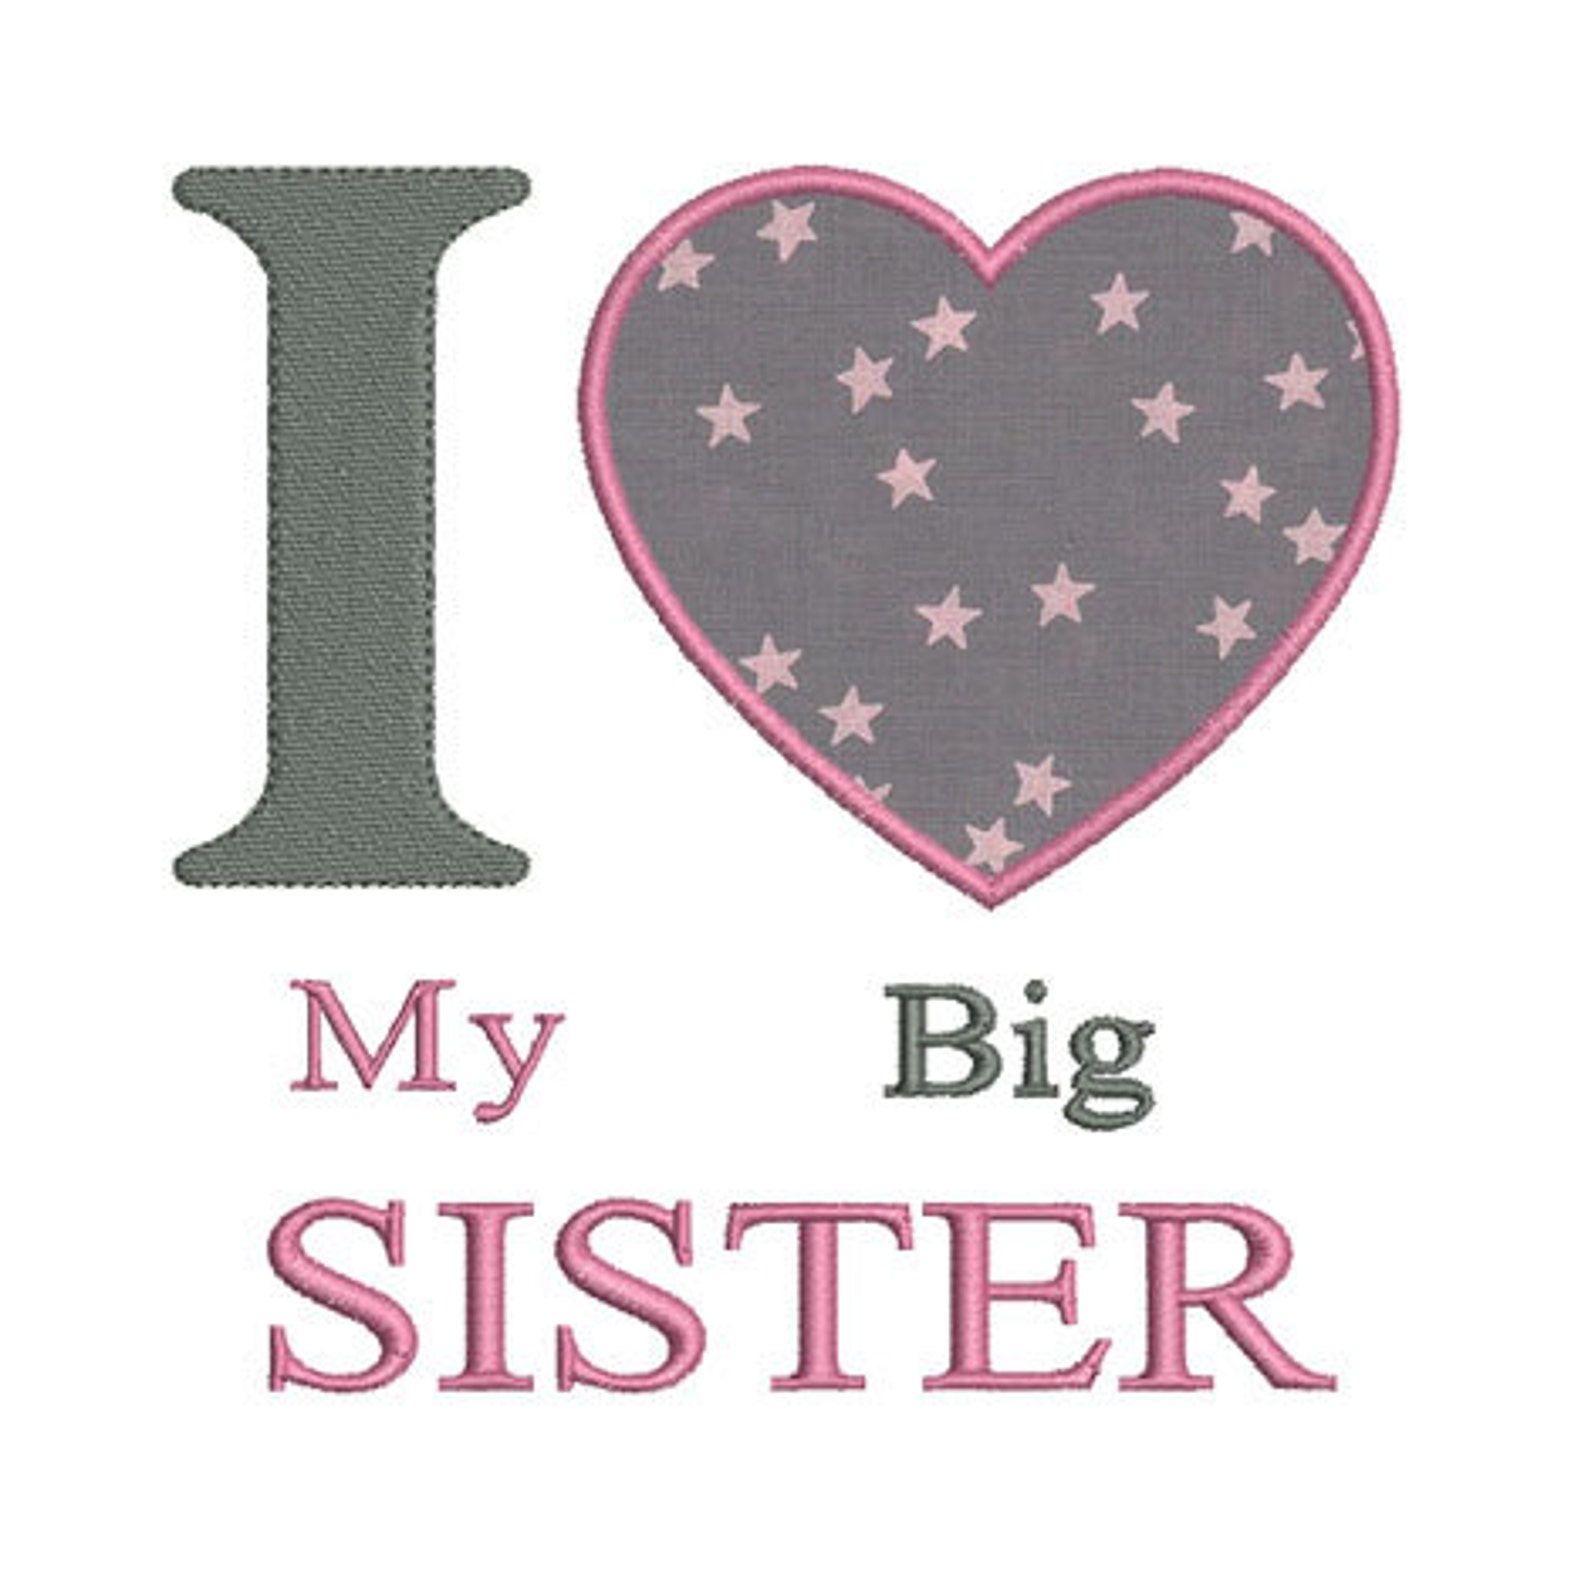 This is my little sisters. Надпись систер. Надпись my sister. Надпись i Love sister. Sisters фото надпись.